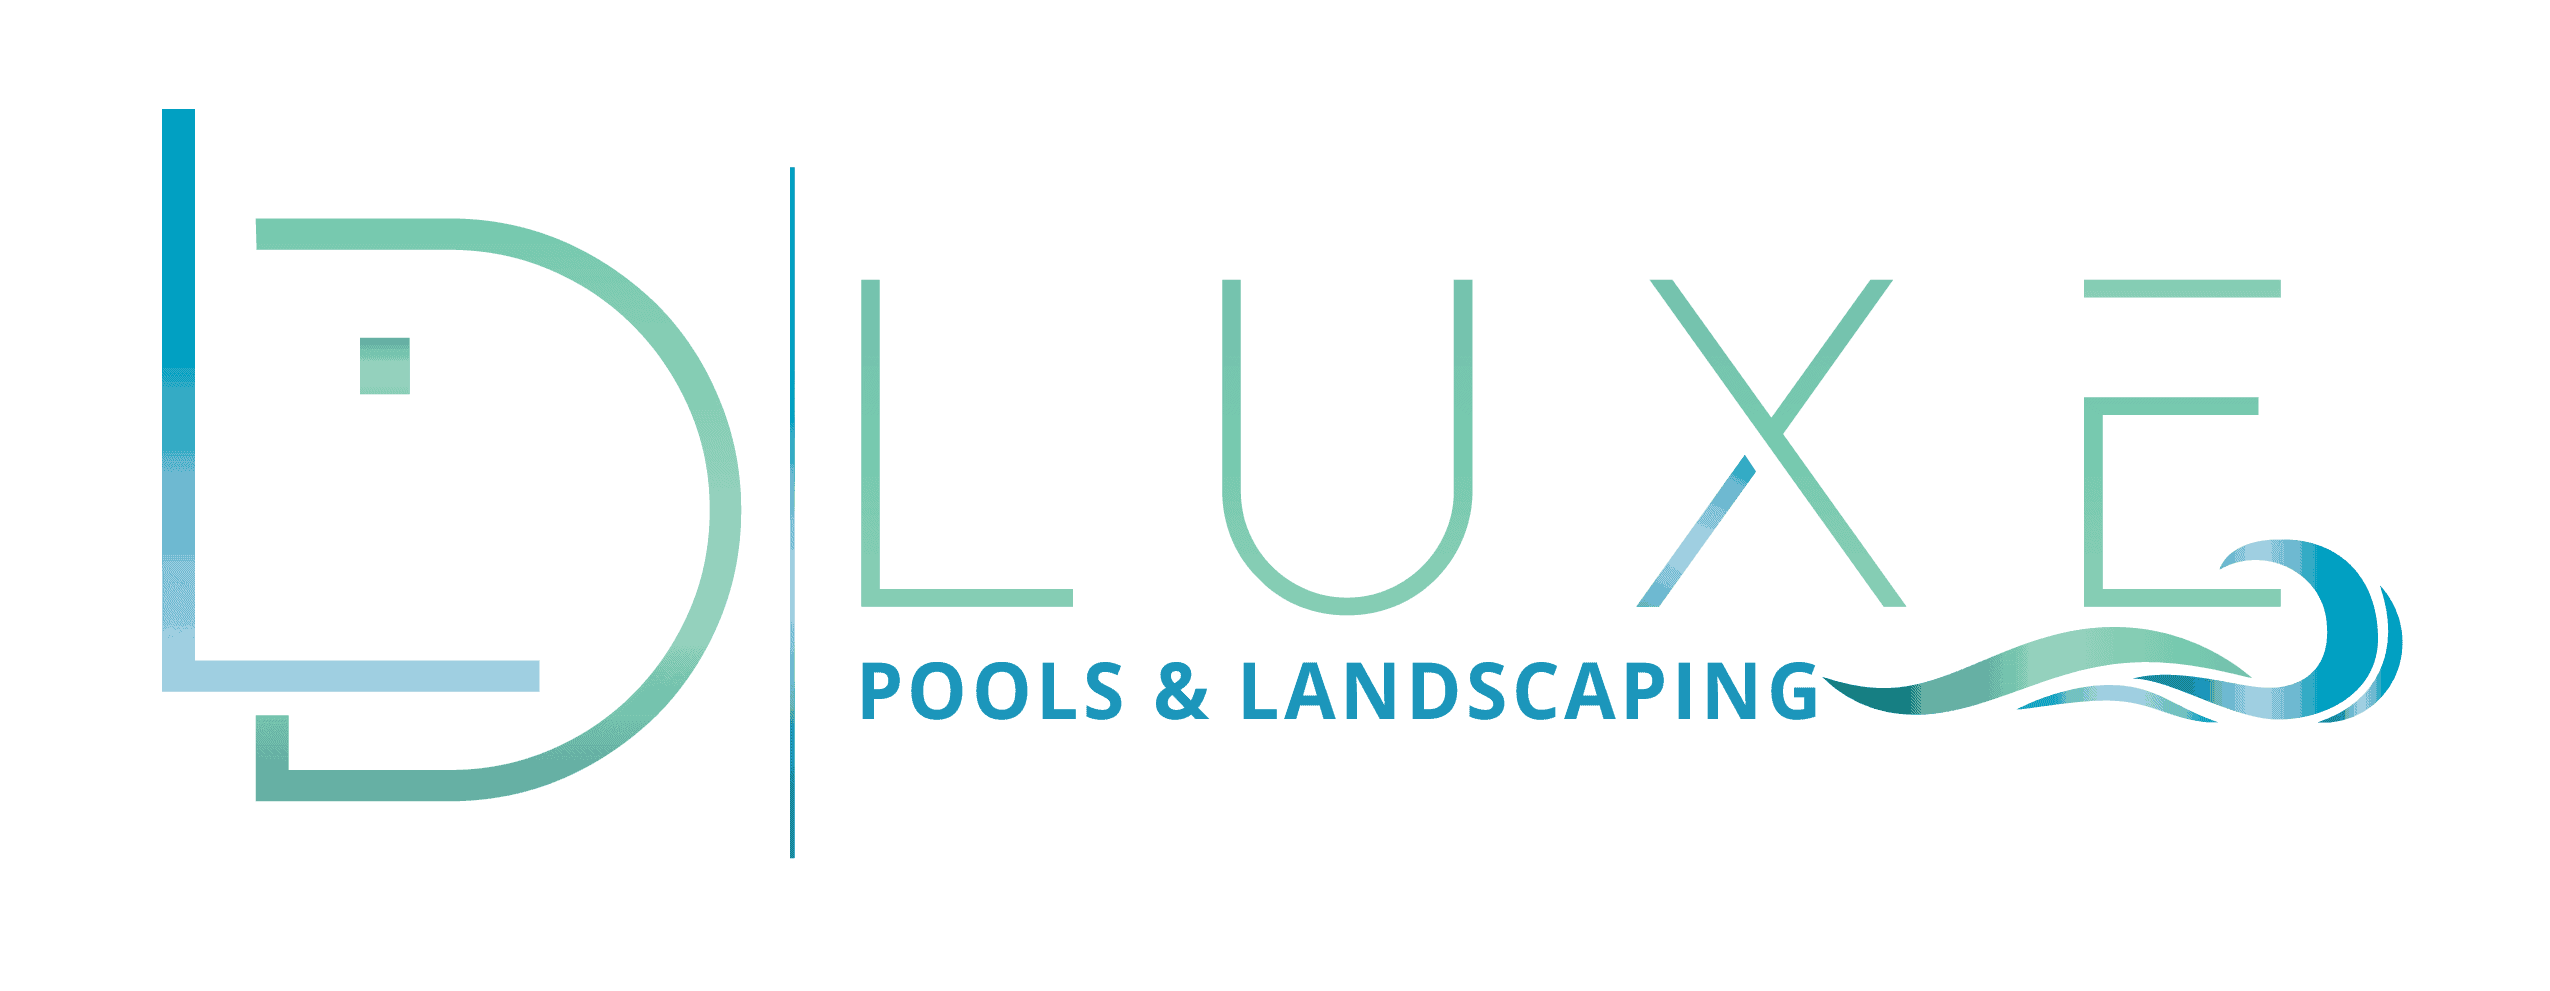 LD Luxe Pools & Landscaping Logo-01